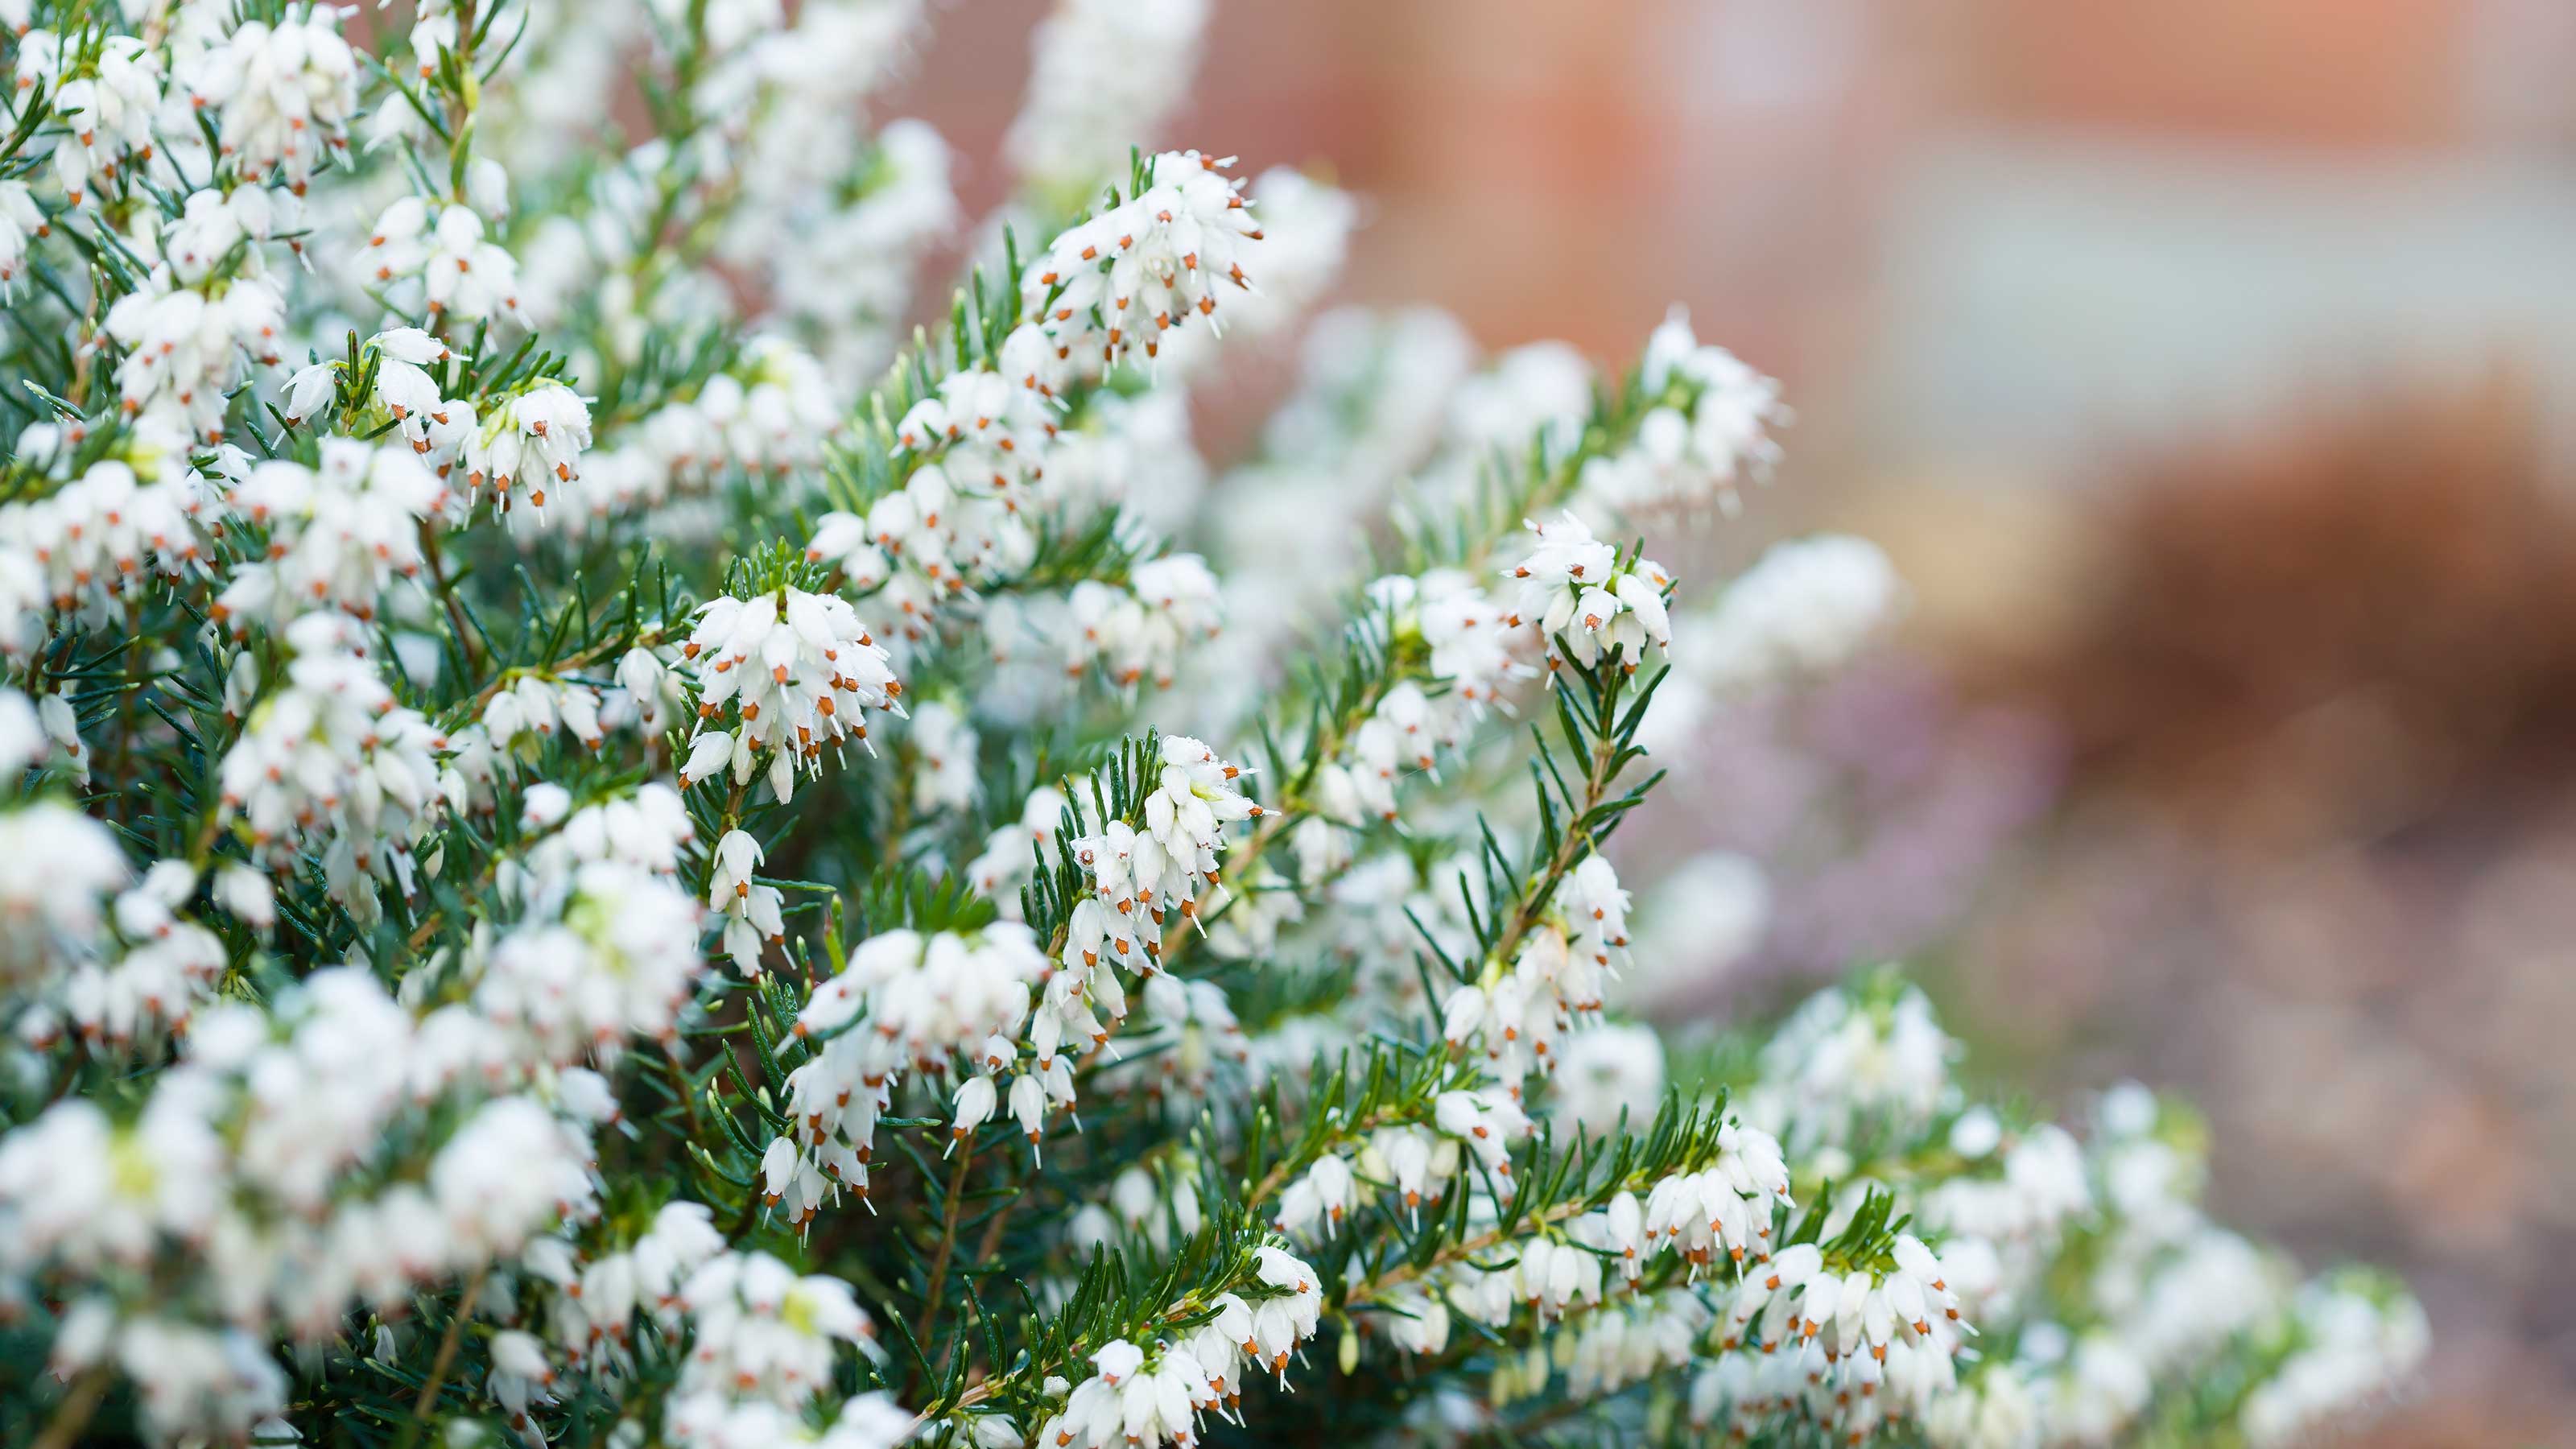 winter heather care and growing guide | gardeningetc